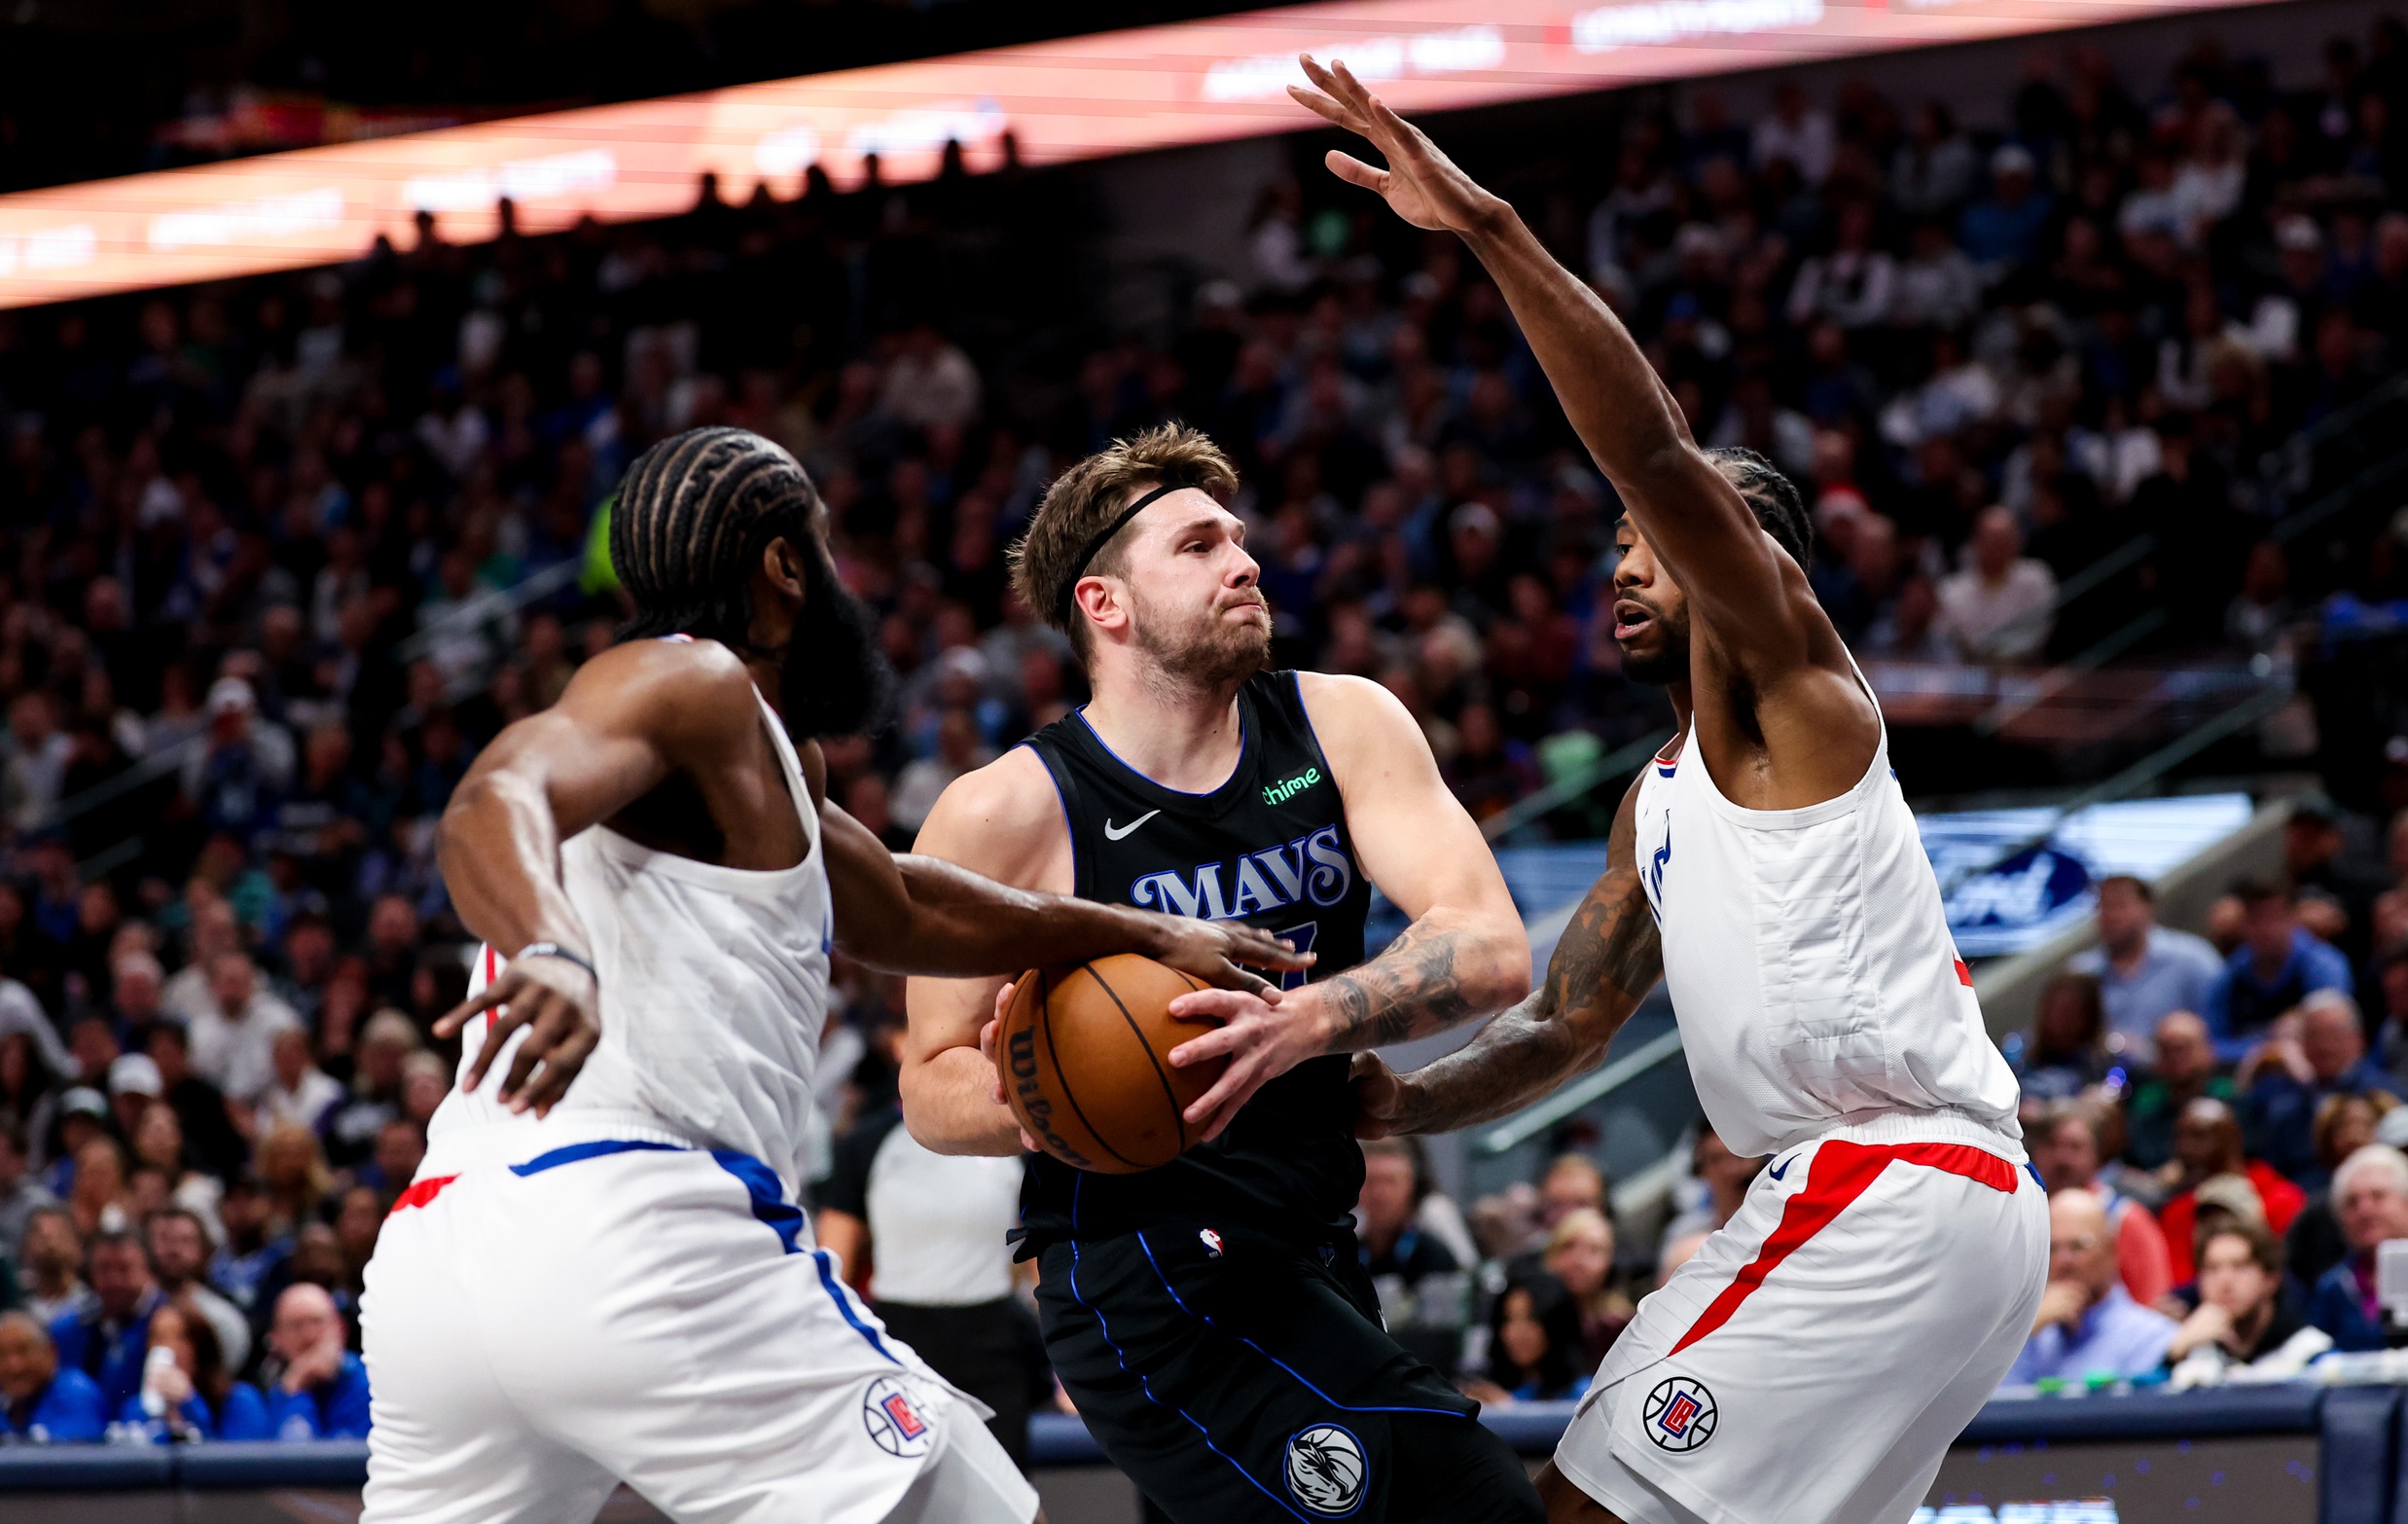 Luka Doncic leads the Mavericks vs the Clippers for the 3rd time in 5 years in the NBA playoffs.